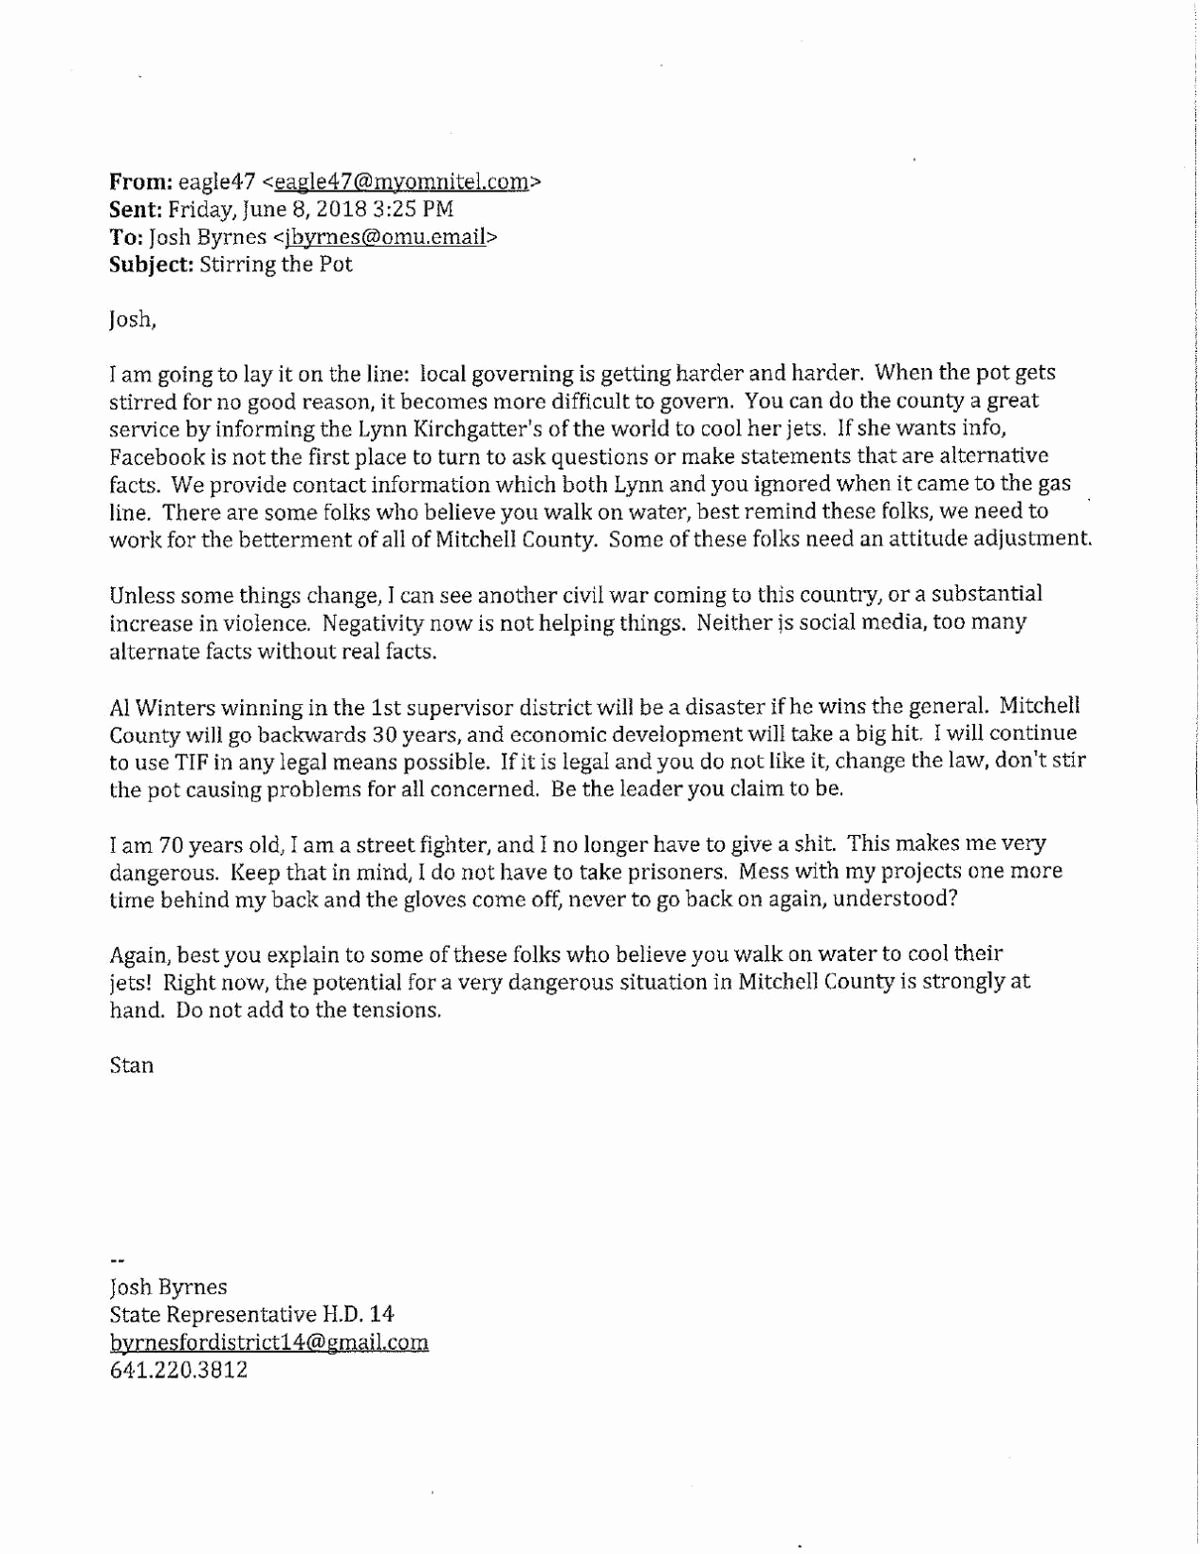 Strong Demand Letter for Payment Beautiful Mitchell County Supervisor to former State Rep Over Tif